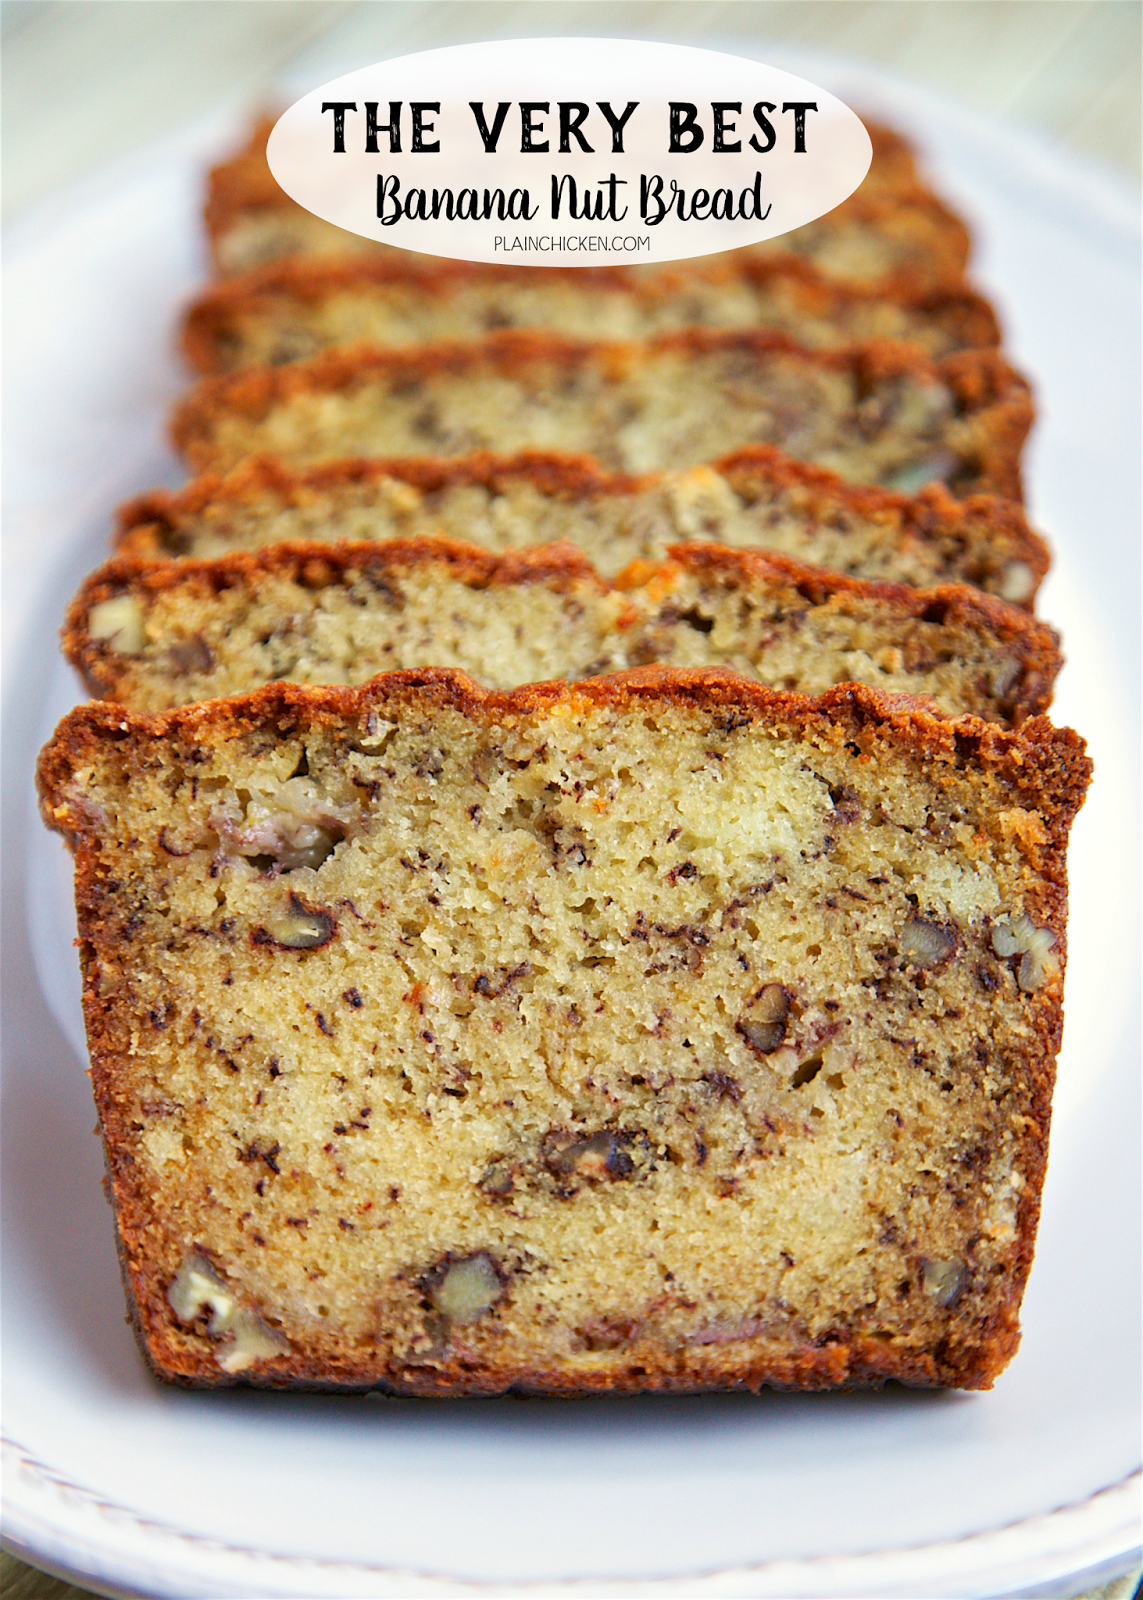 The Very Best Banana Nut Bread - CRAZY good! butter, sugar, eggs, flour, baking soda, buttermilk, ripe bananas and pecans - SO easy to make. Tastes amazing. Great for breakfast or an afternoon snack.